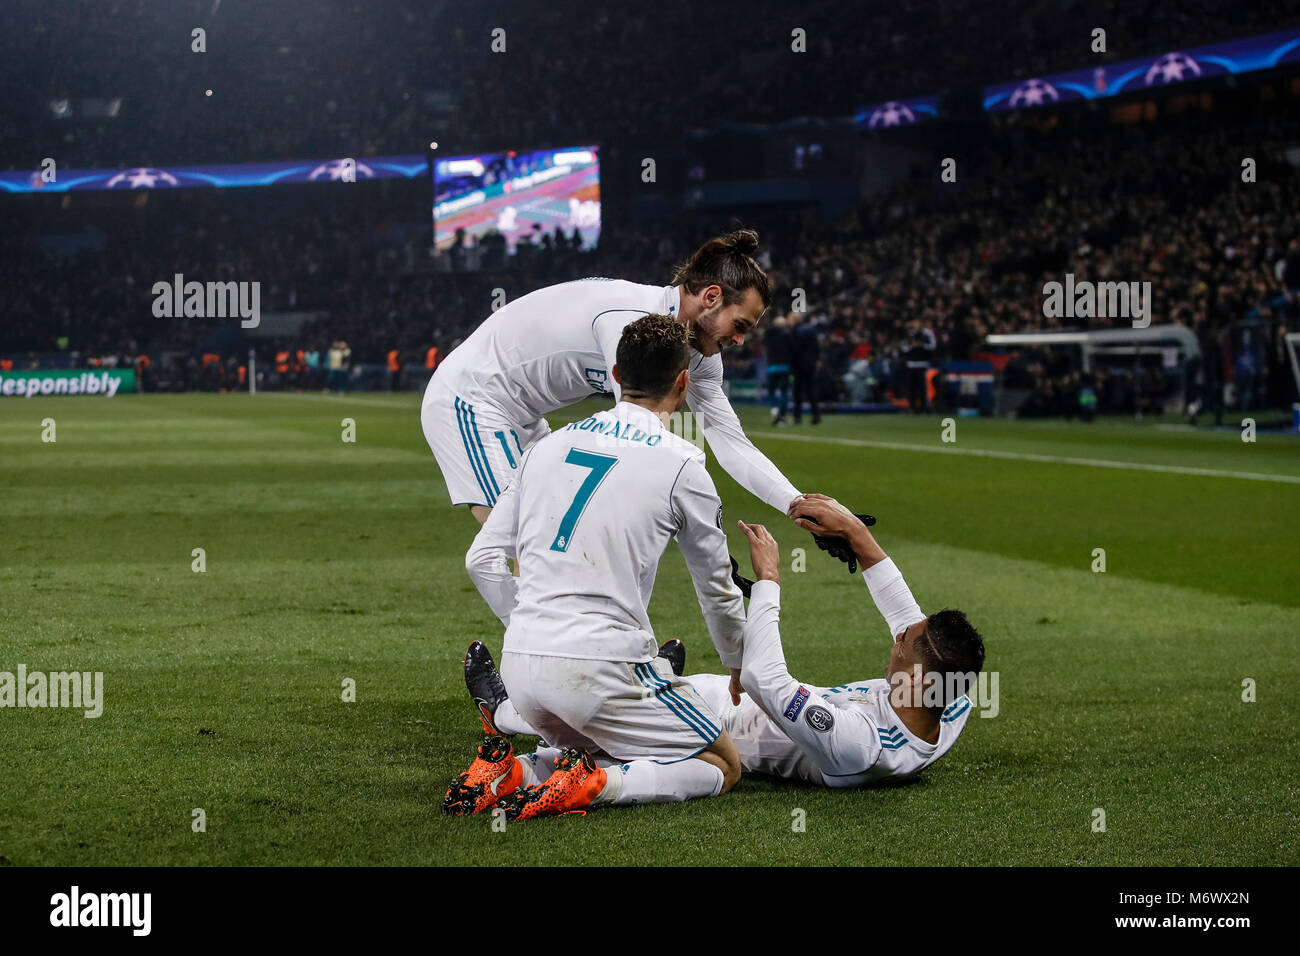 Paris, France, March 6, 2018. Carlos Enrique Casemiro (Real Madrid) celebrates his goal which made it (1, 2) UCL Champions League match between PSG vs Real Madrid at the Parc des Princes stadium in Credit: Gtres Información más Comuniación on line, S.L./Alamy Live News Stock Photo